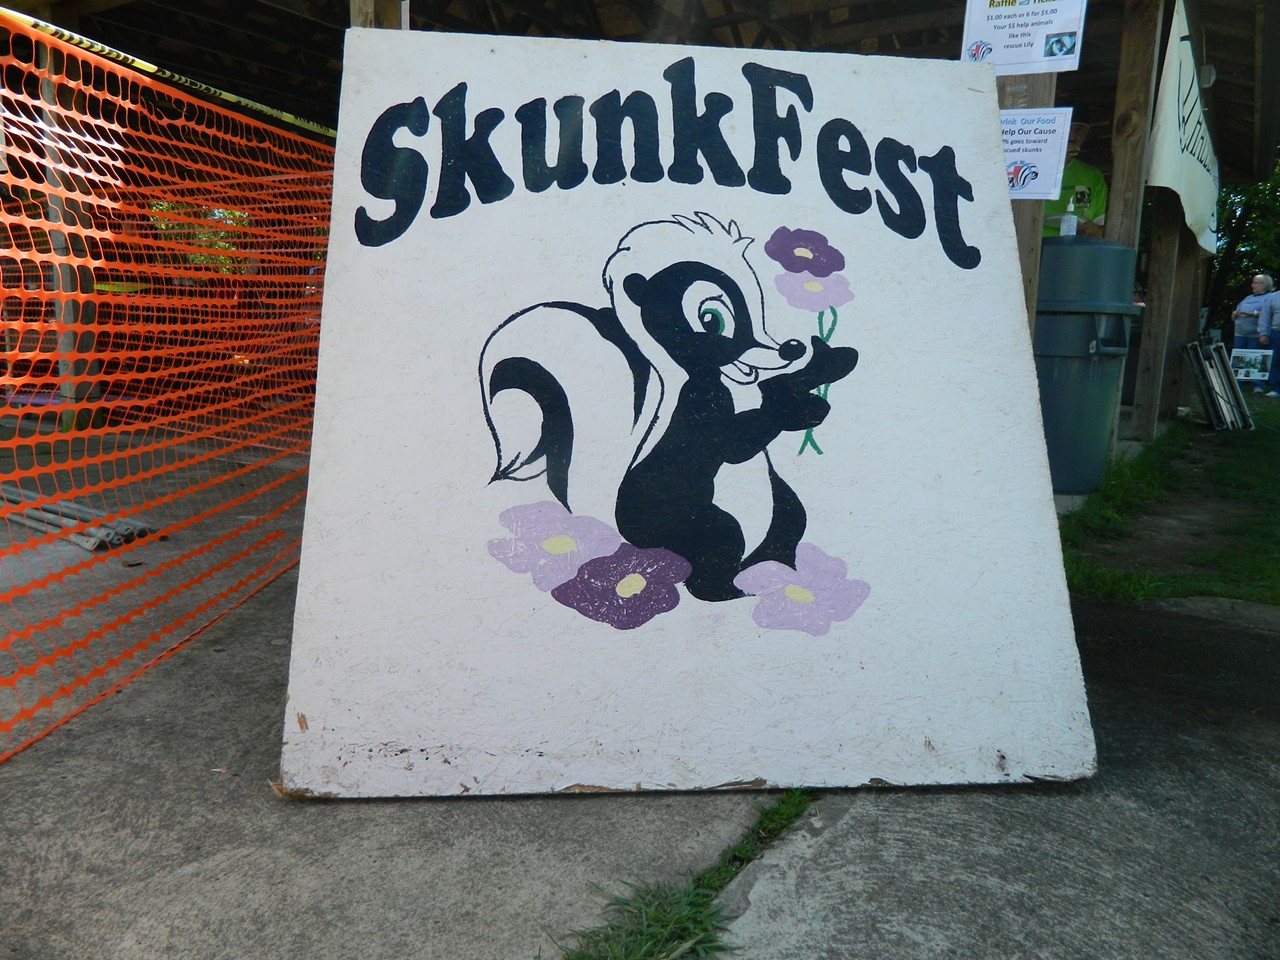 Here's What You Missed at Cleveland's 12th Annual Skunk Fest